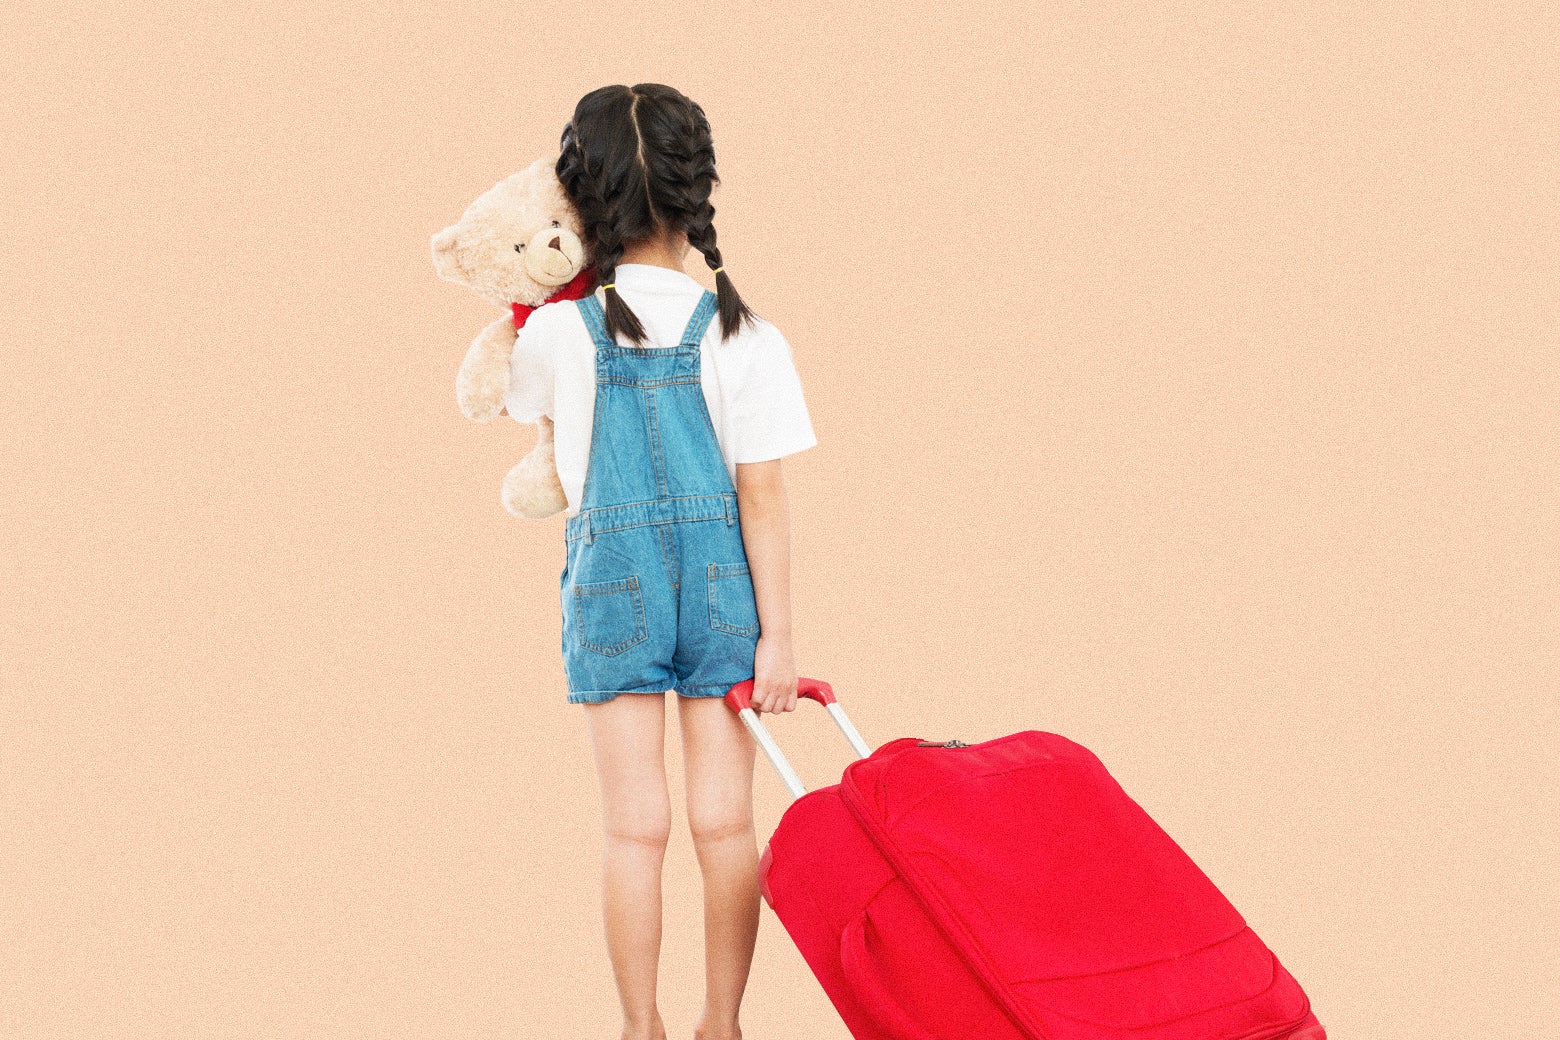 A child with braids hugs a teddy bear while pulling a suitcase.